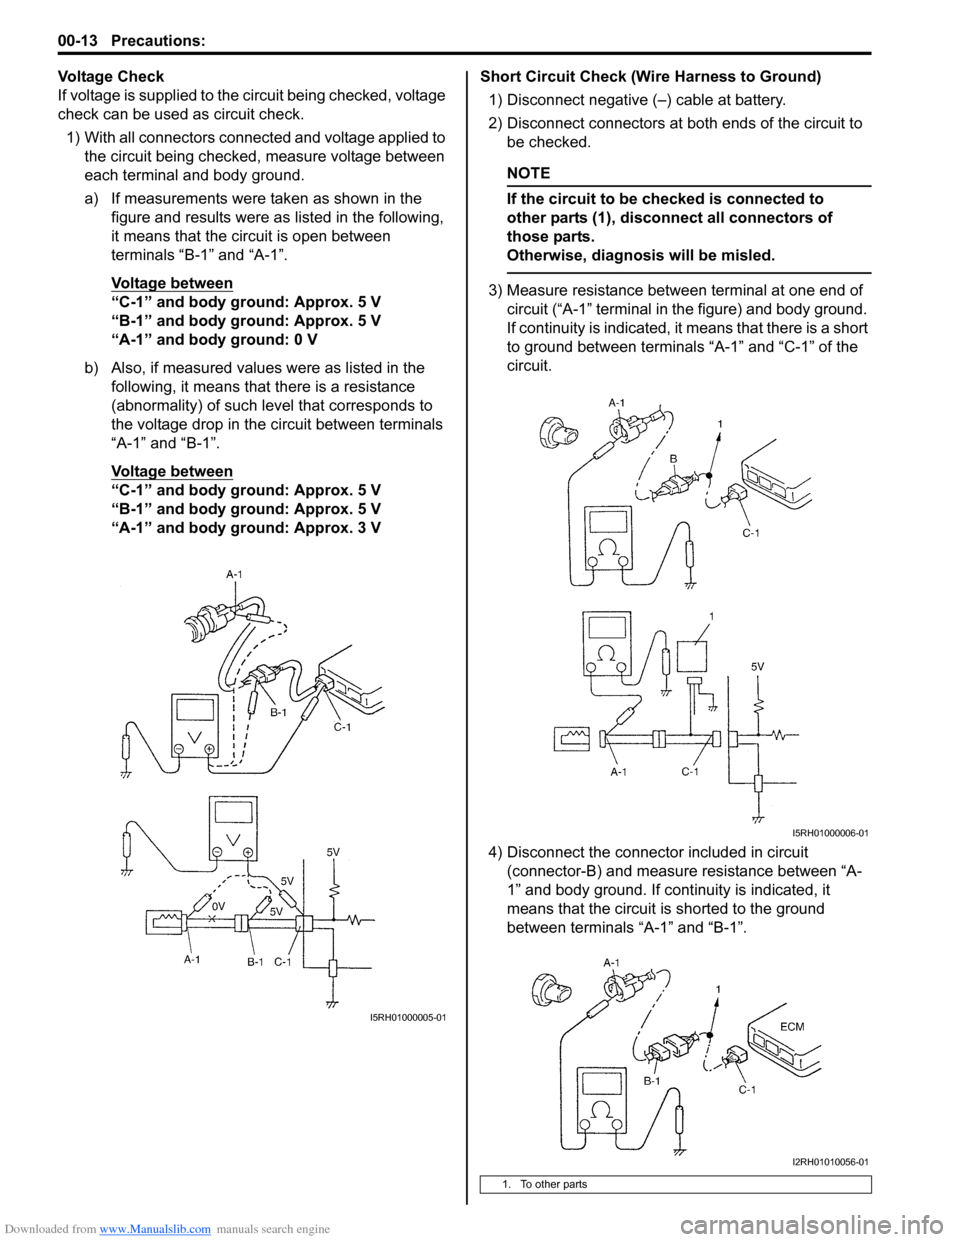 SUZUKI SX4 2006 1.G Service Workshop Manual Downloaded from www.Manualslib.com manuals search engine 00-13 Precautions: 
Voltage Check
If voltage is supplied to the circuit being checked, voltage 
check can be used as circuit check.
1) With all